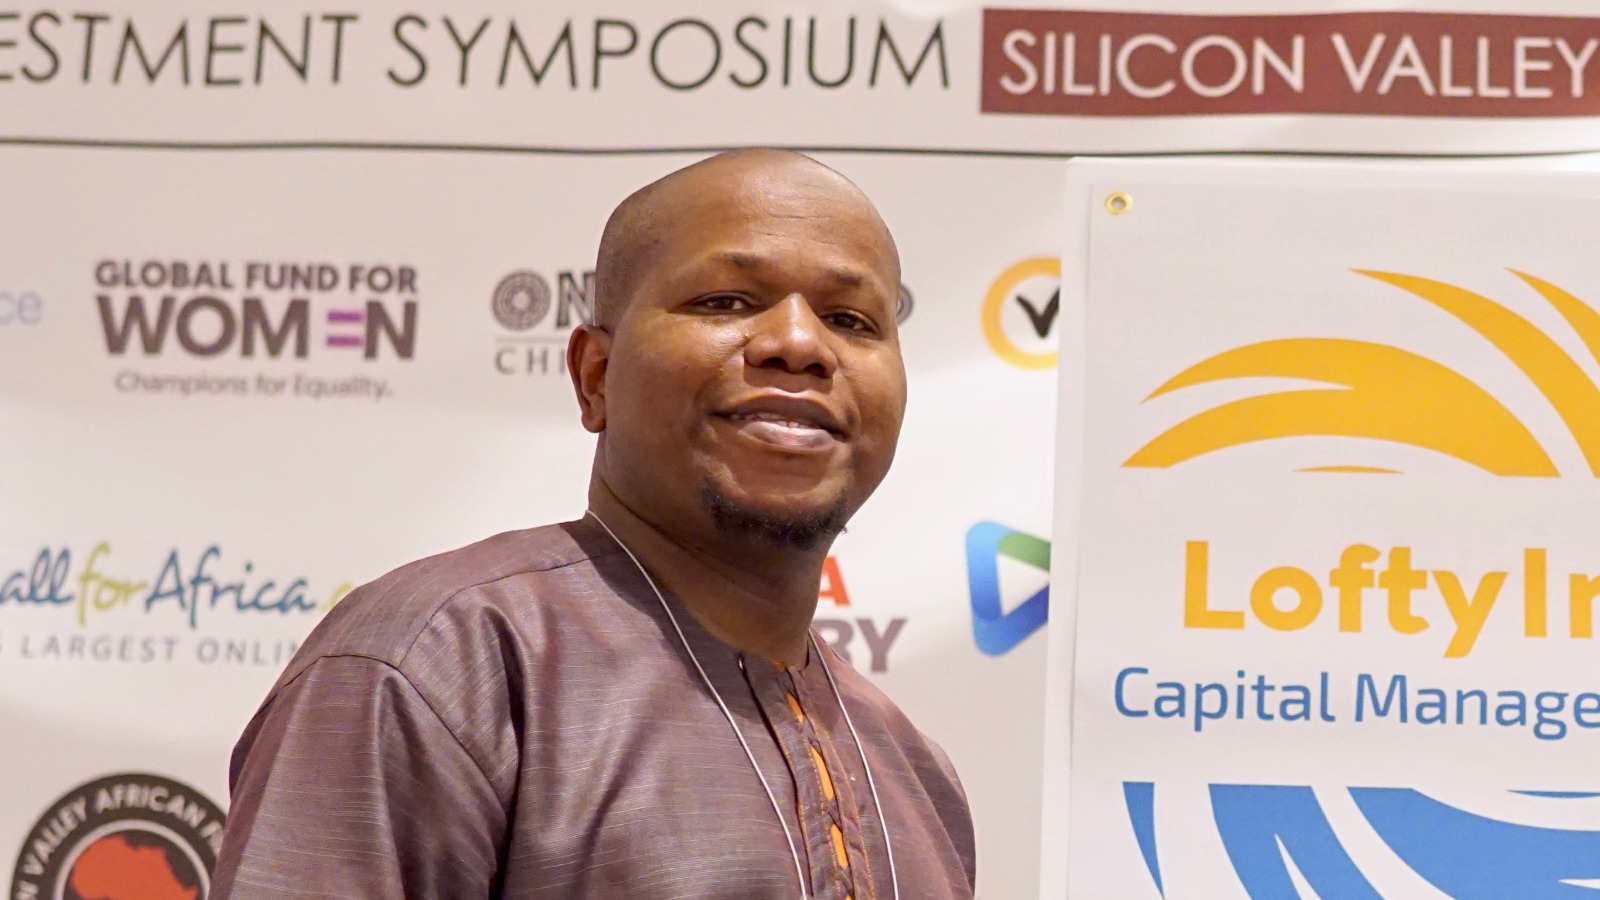 Nigerian VC firm LoftyInc Capital Management made 65 African investments in 2021